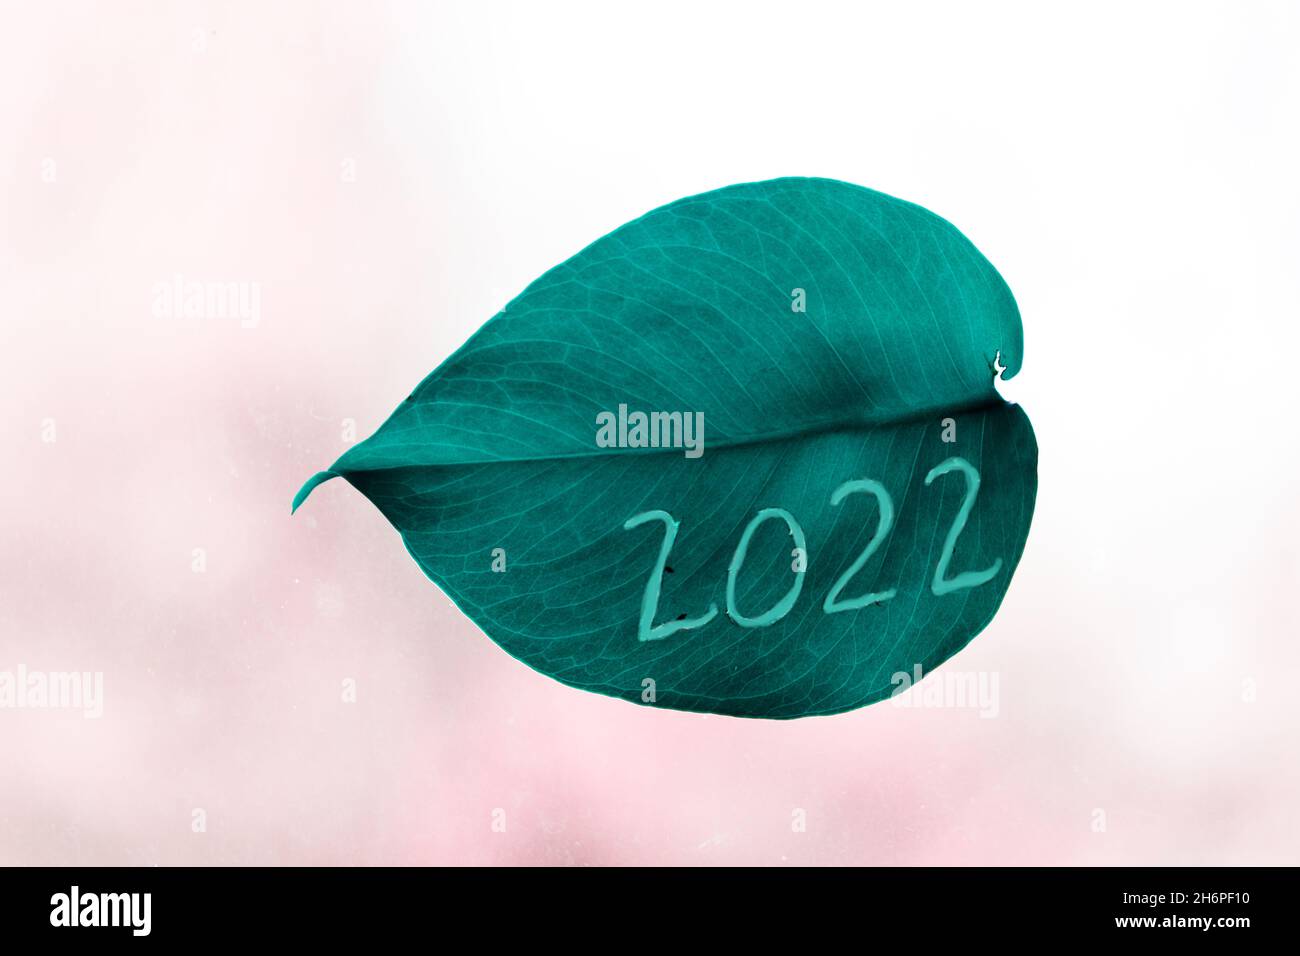 Number 2022. New Year. The number 2022 is carved into a green monstera leaf. Stock Photo